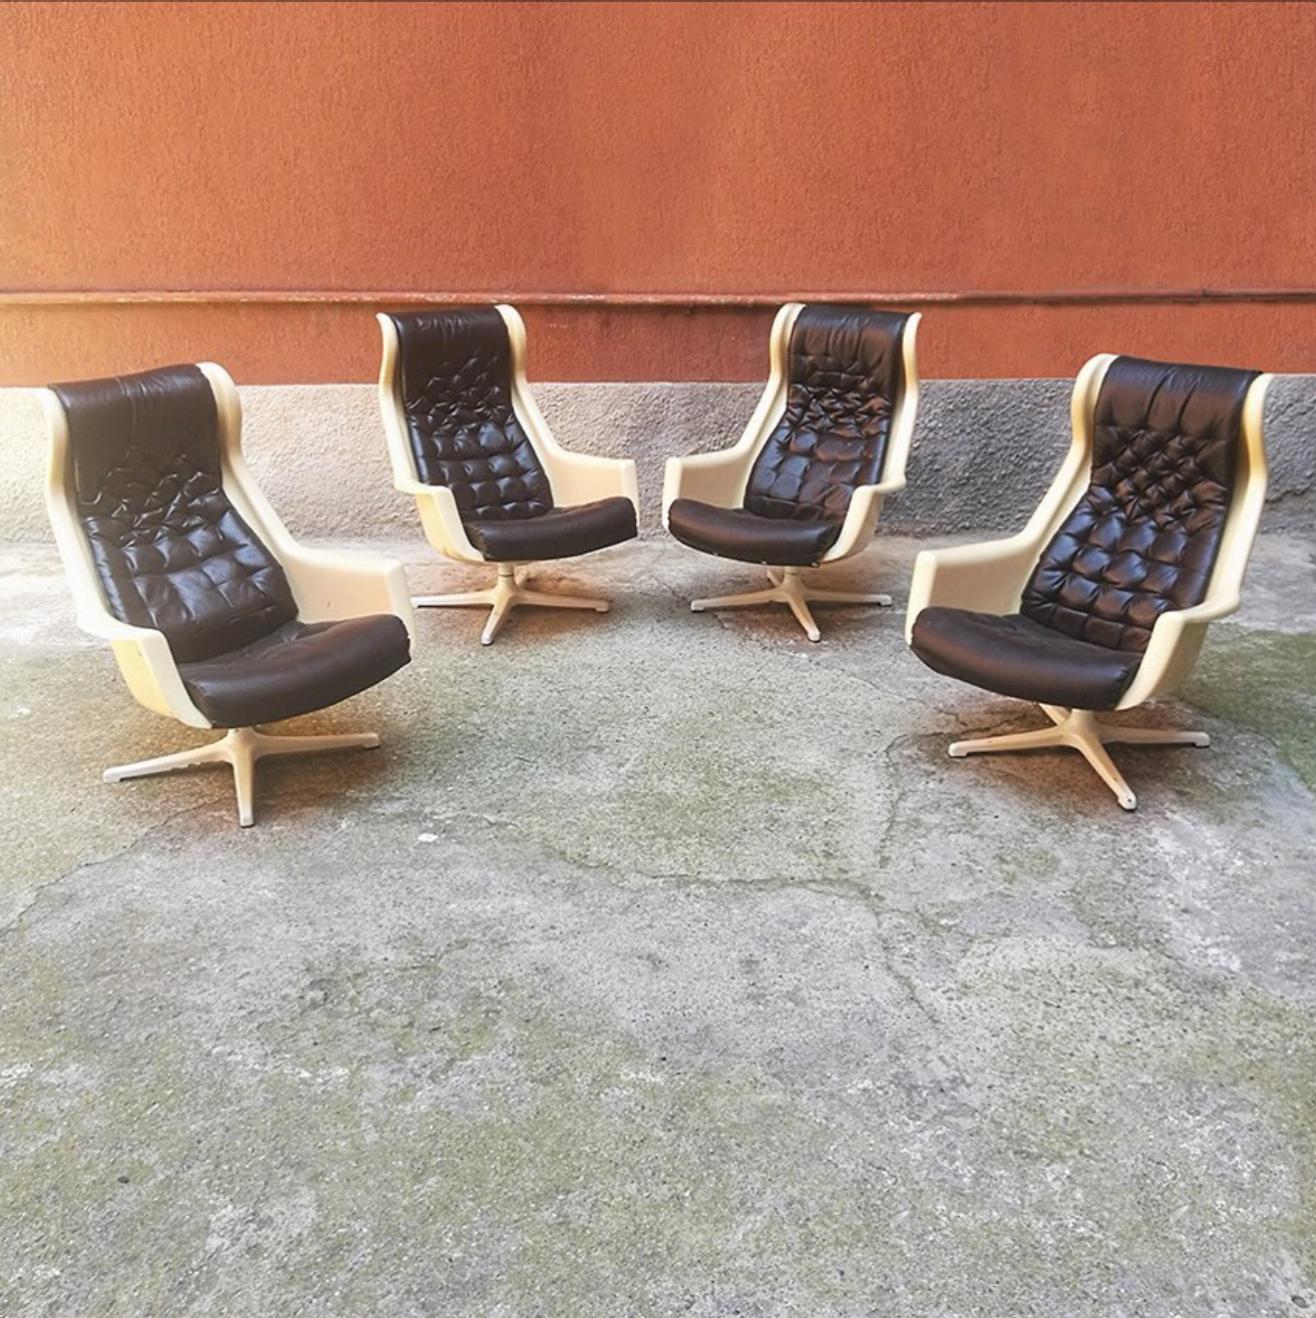 Italian Swedes mid-century modern Space Age Armchair Galaxy by Alf Svensson for Dux 1968